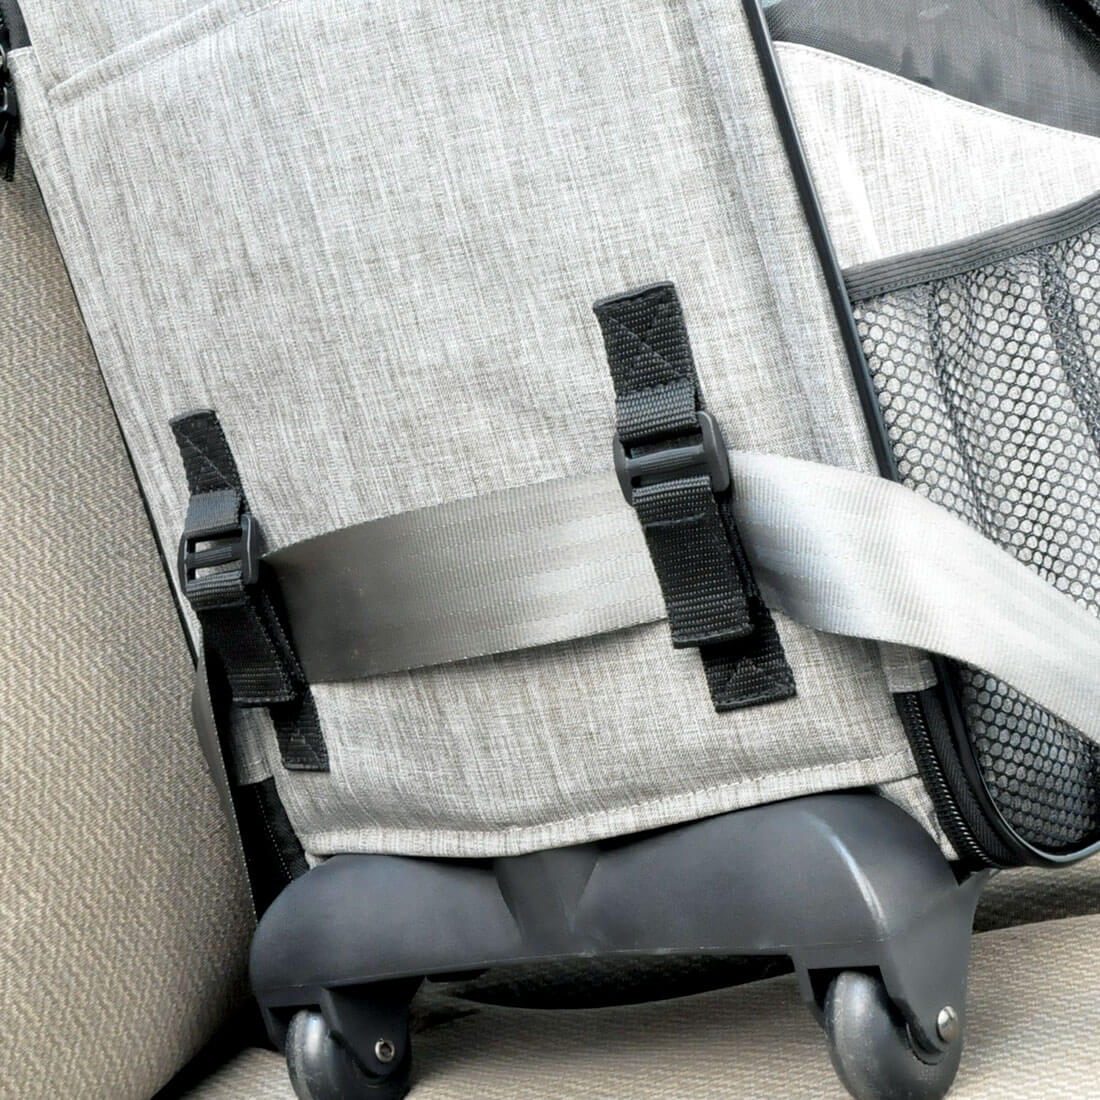 Bergan Rolling Pet Carrier strapped in by a seatbelt